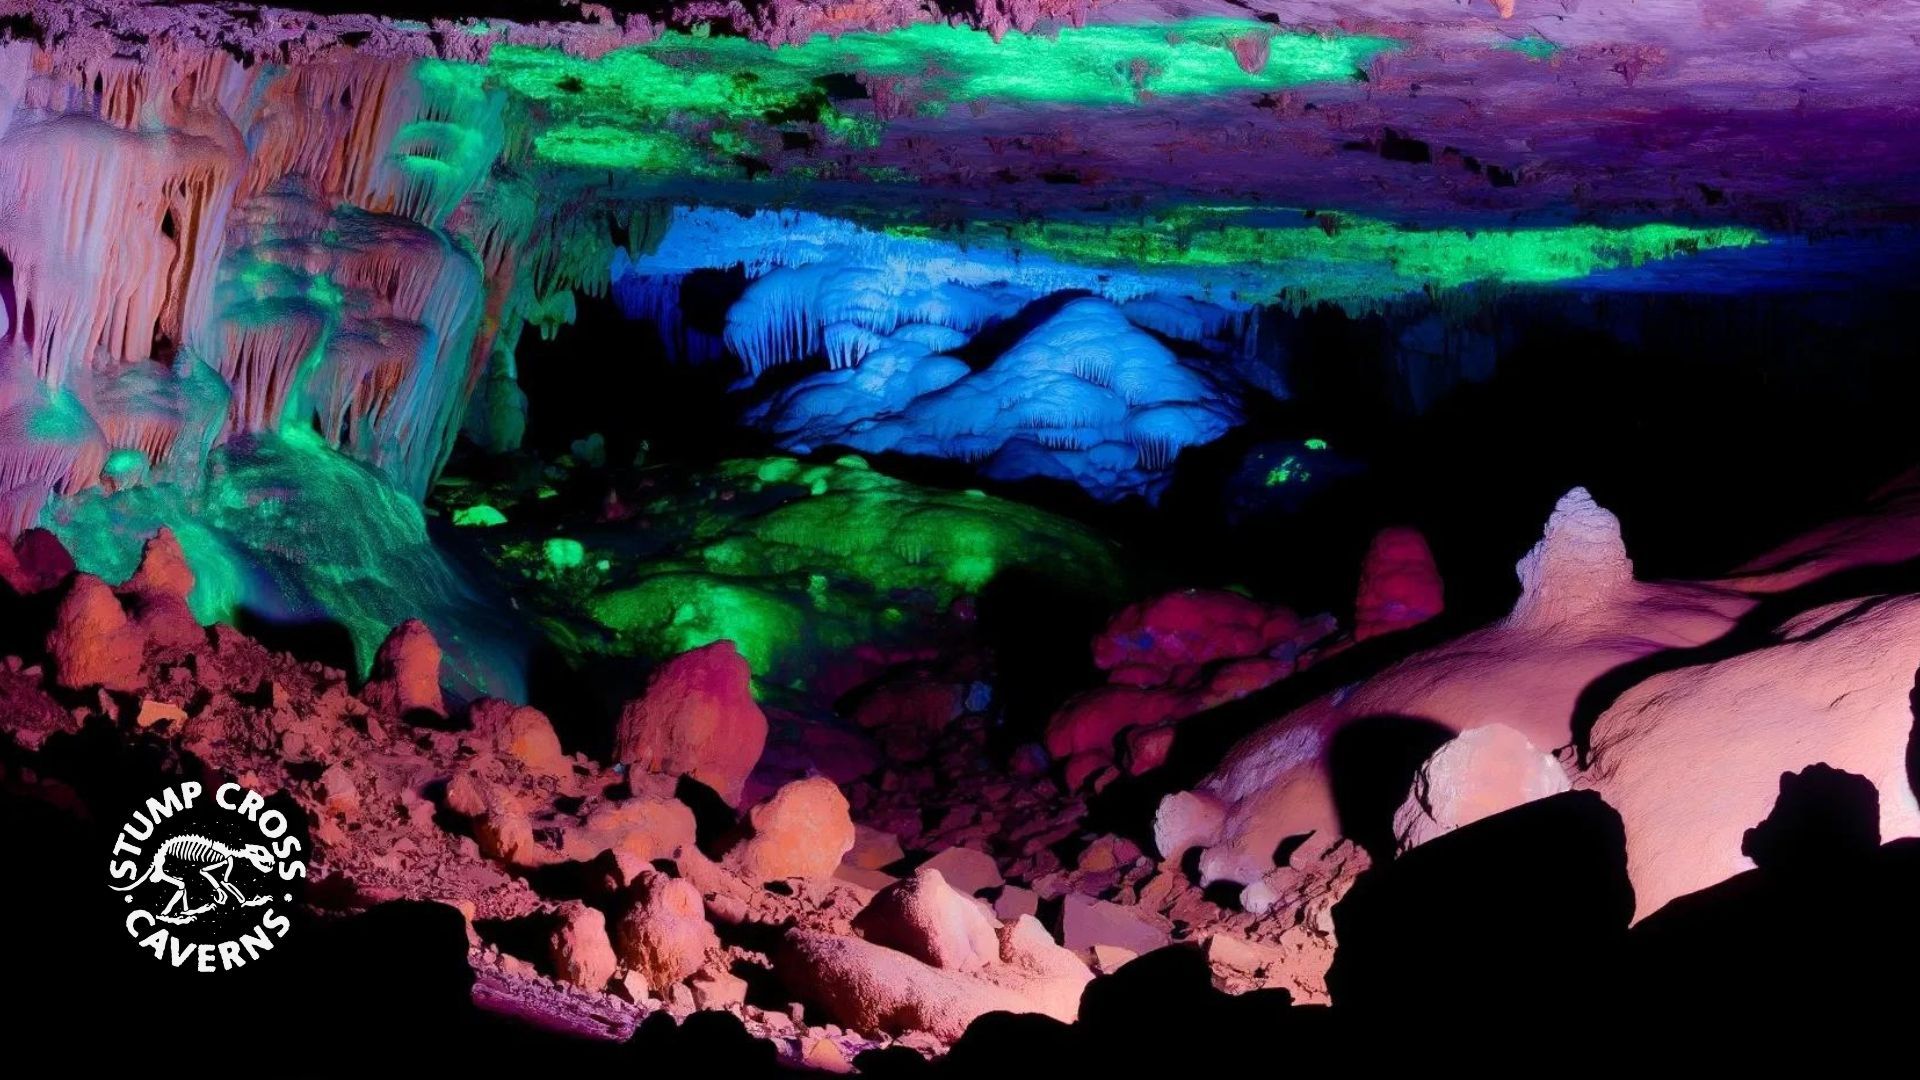 At Stump Cross Caverns, the rocks glow under UV light. But why? Learn all about it in our explainer article.
